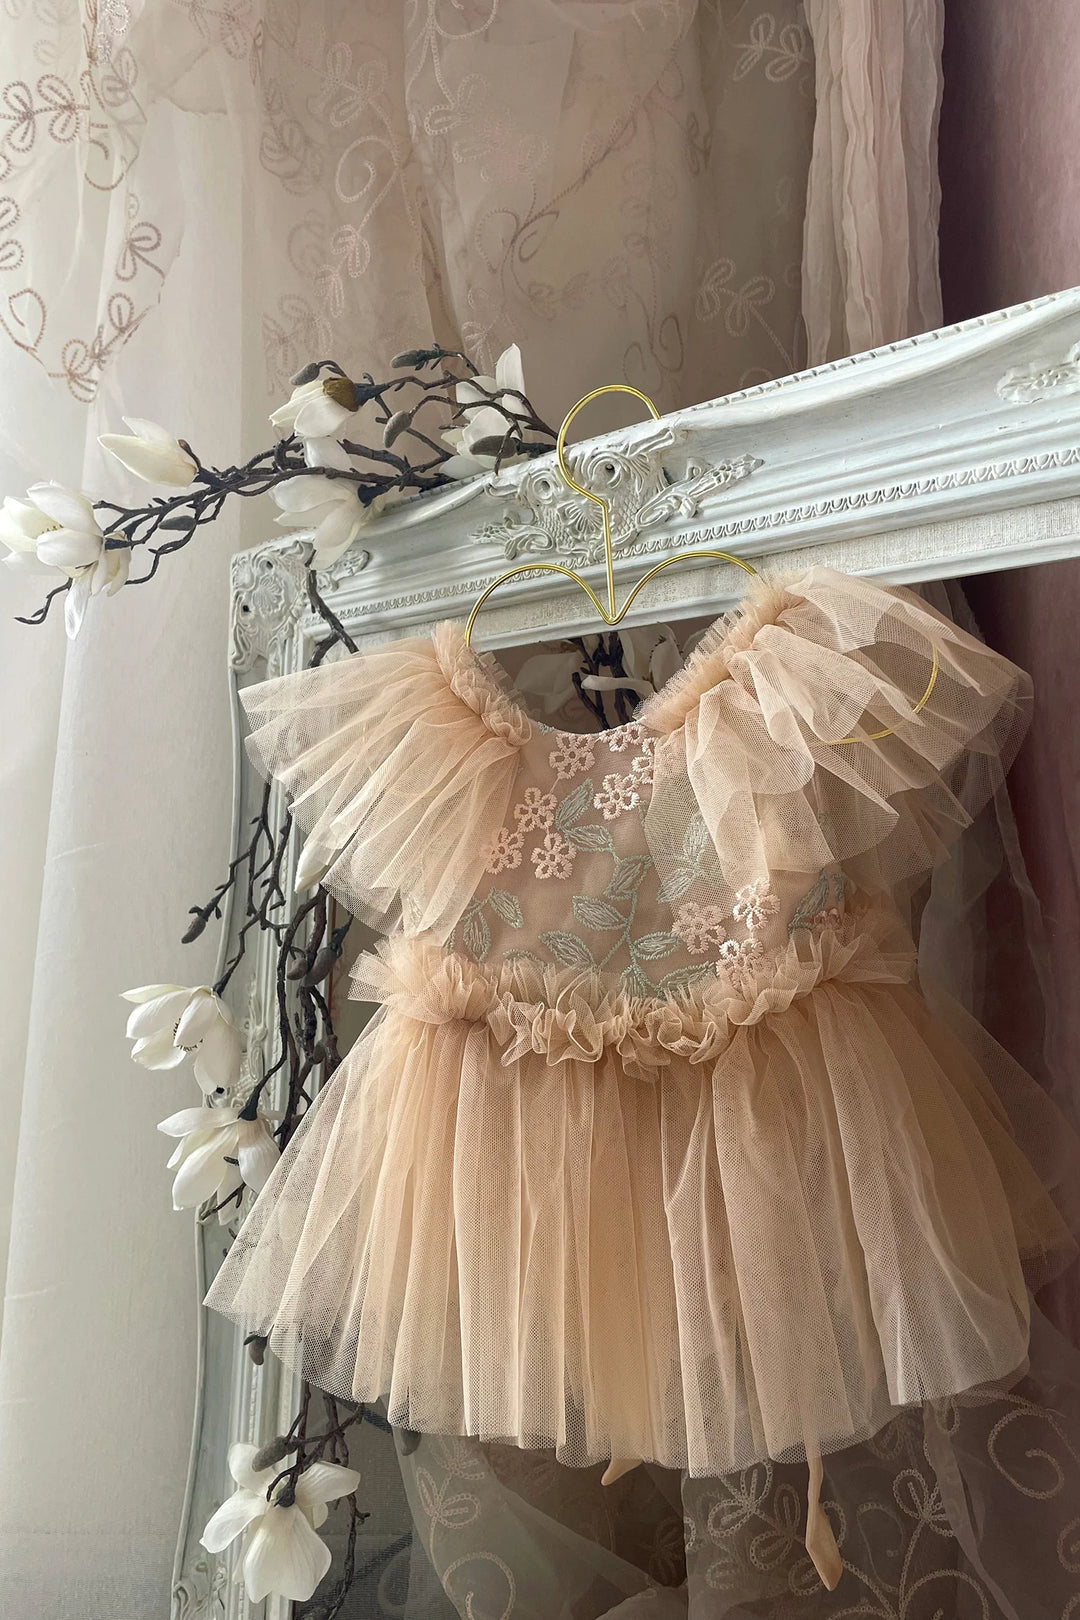 NEW RELEASE: Introducing the "Honey Posie" Dress – A Whimsical Embrace of Childhood